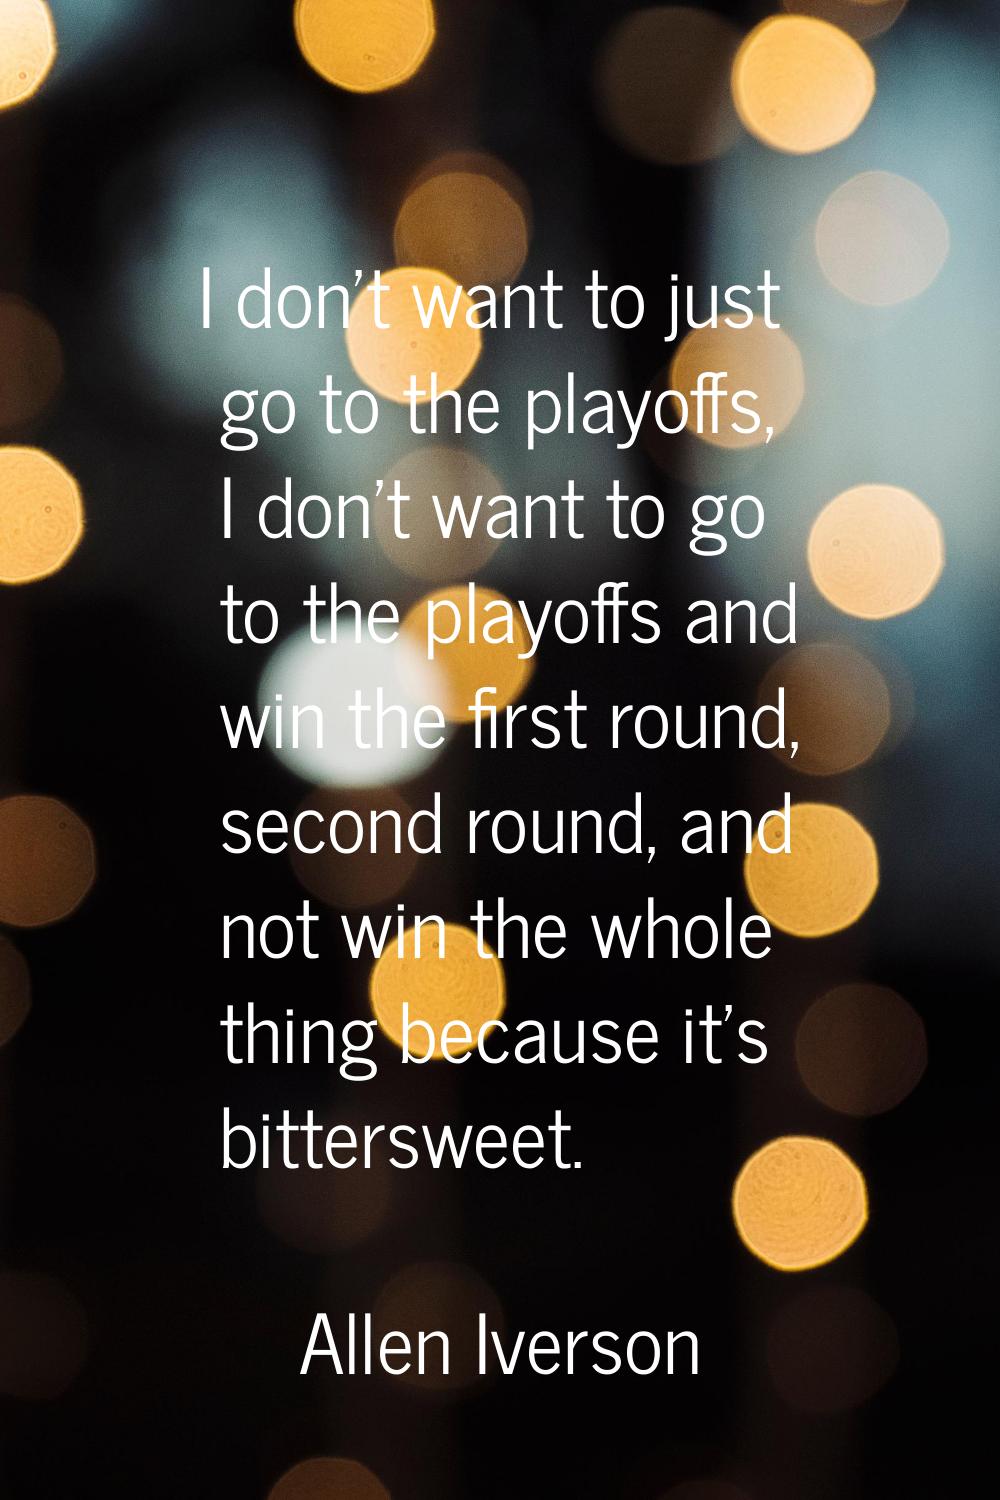 I don't want to just go to the playoffs, I don't want to go to the playoffs and win the first round